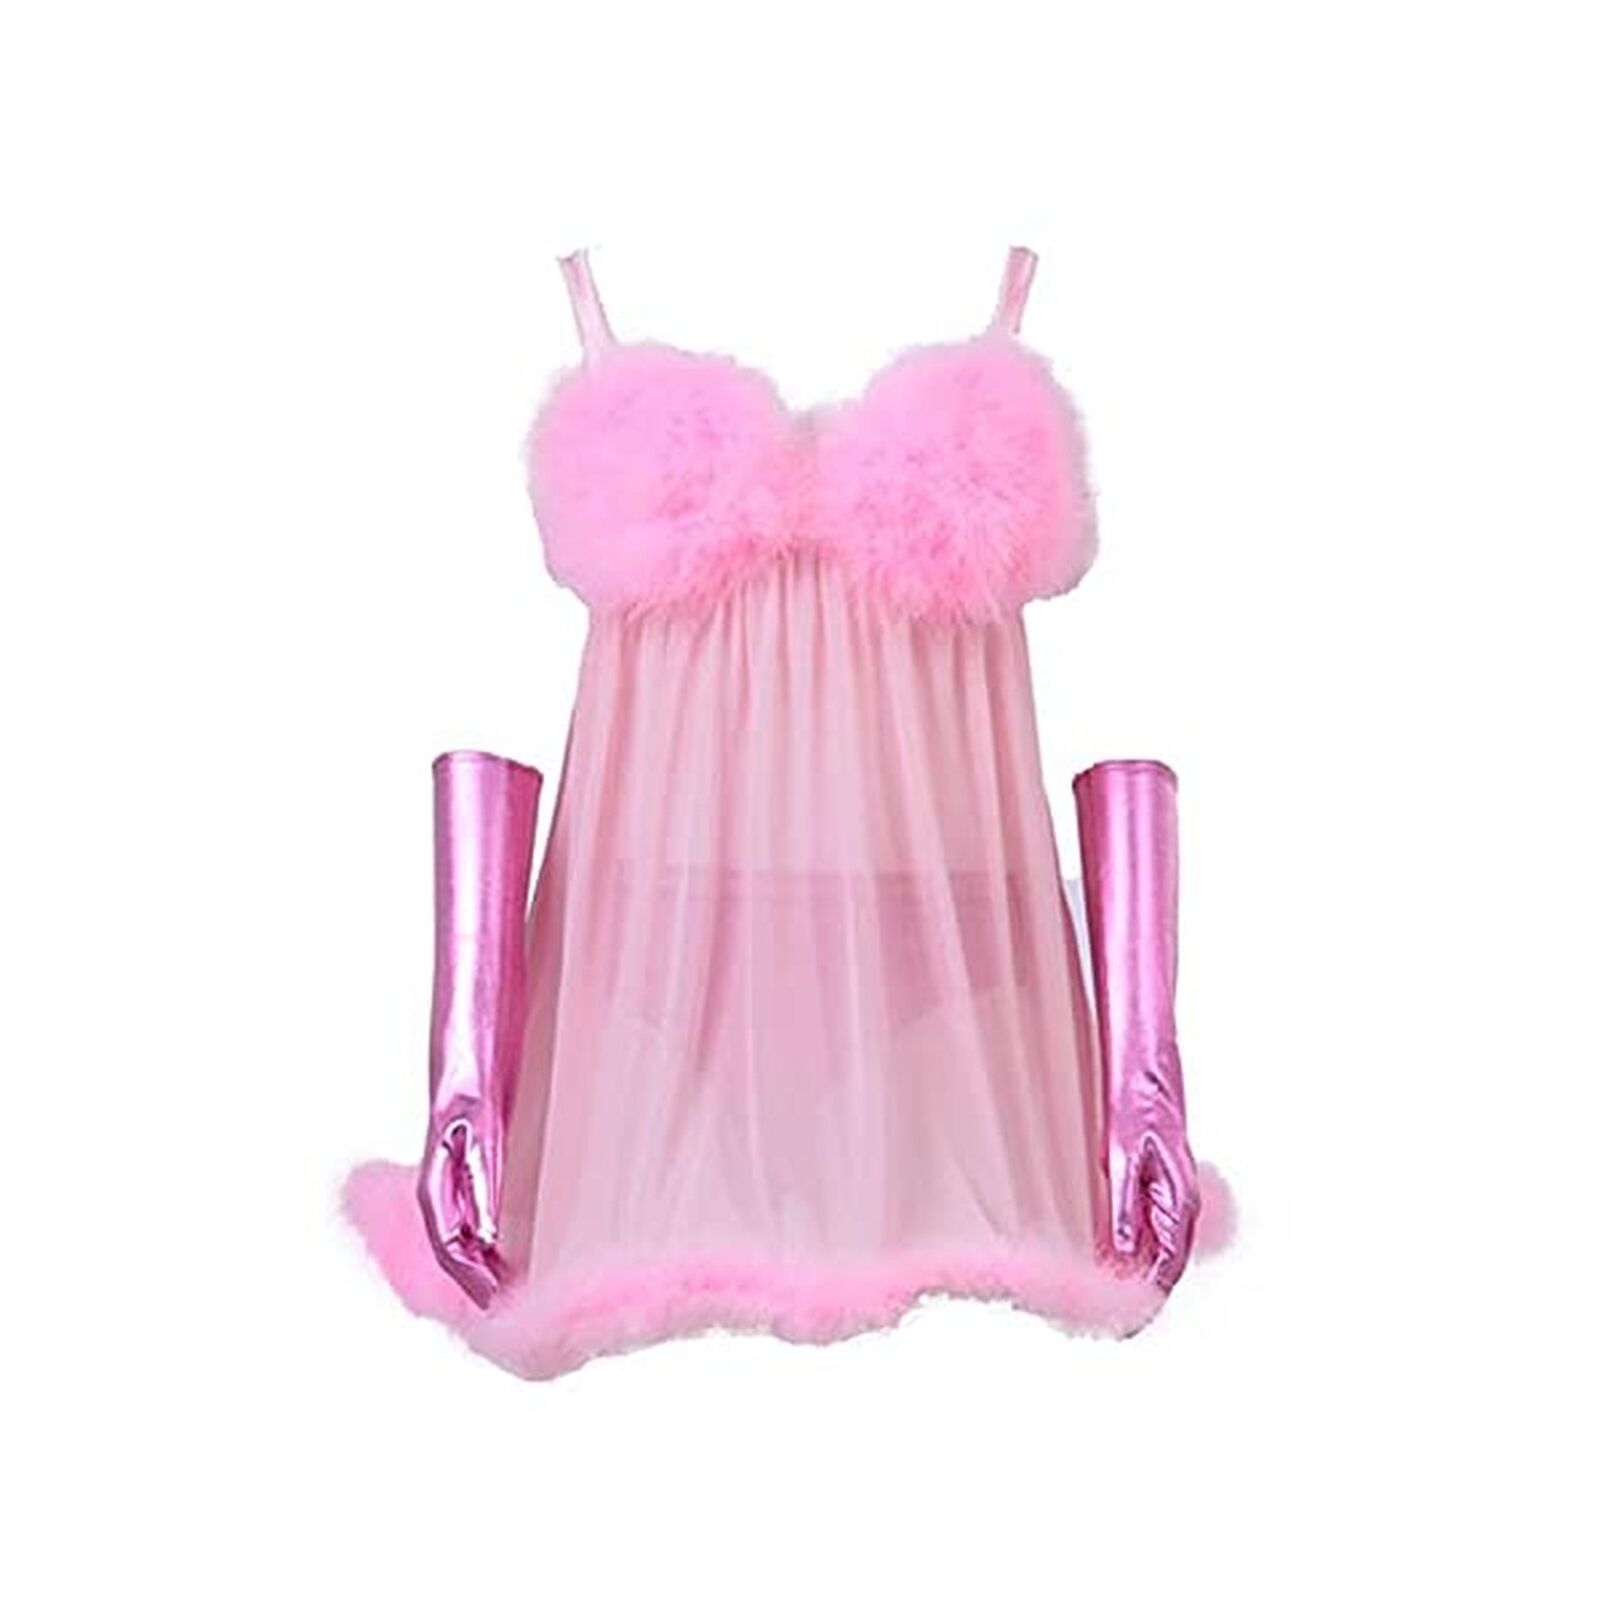 Fembot Costume Dress Outfit Pink Negligees Sexy for Women Adult Medium